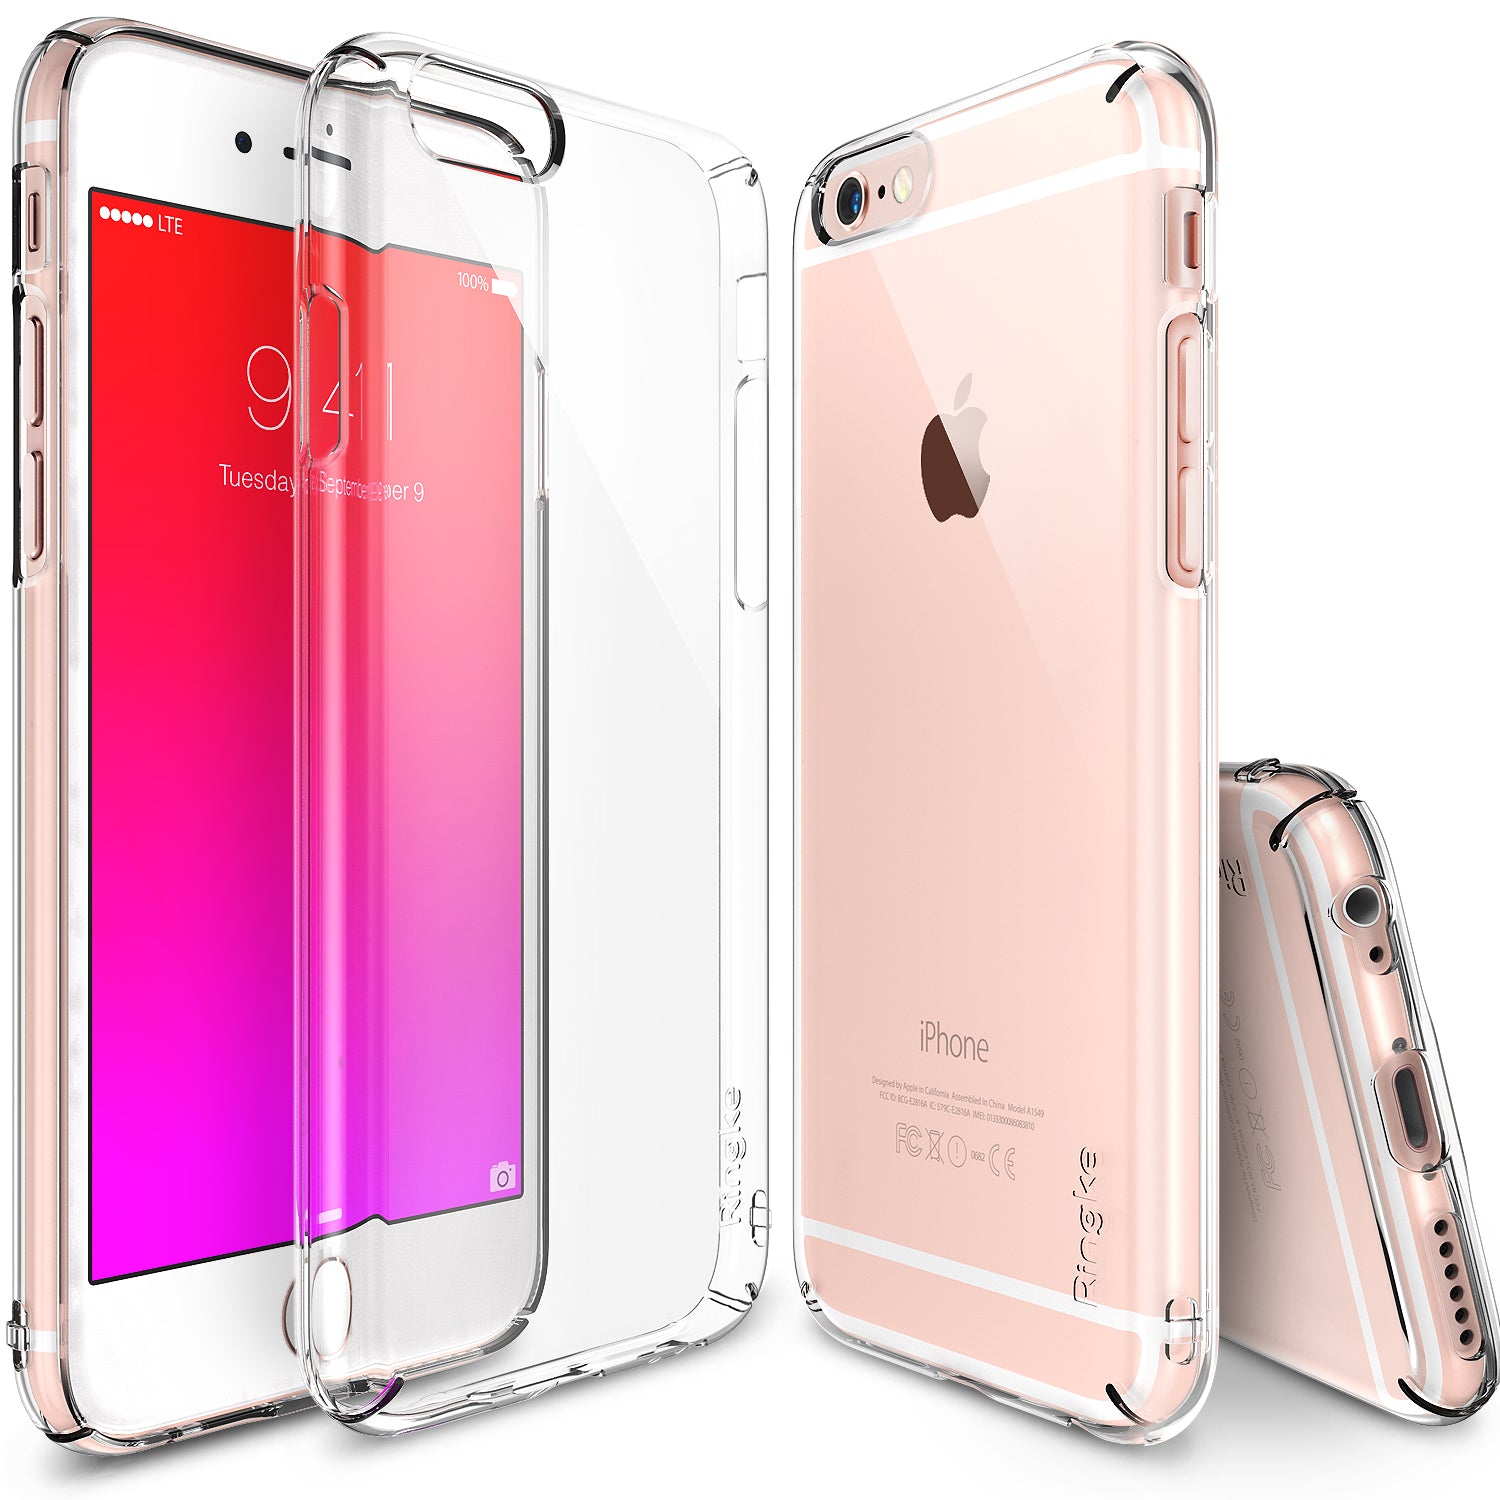 ringke slim lightweight hard pc thin case cover for iphone 6s plus main clear